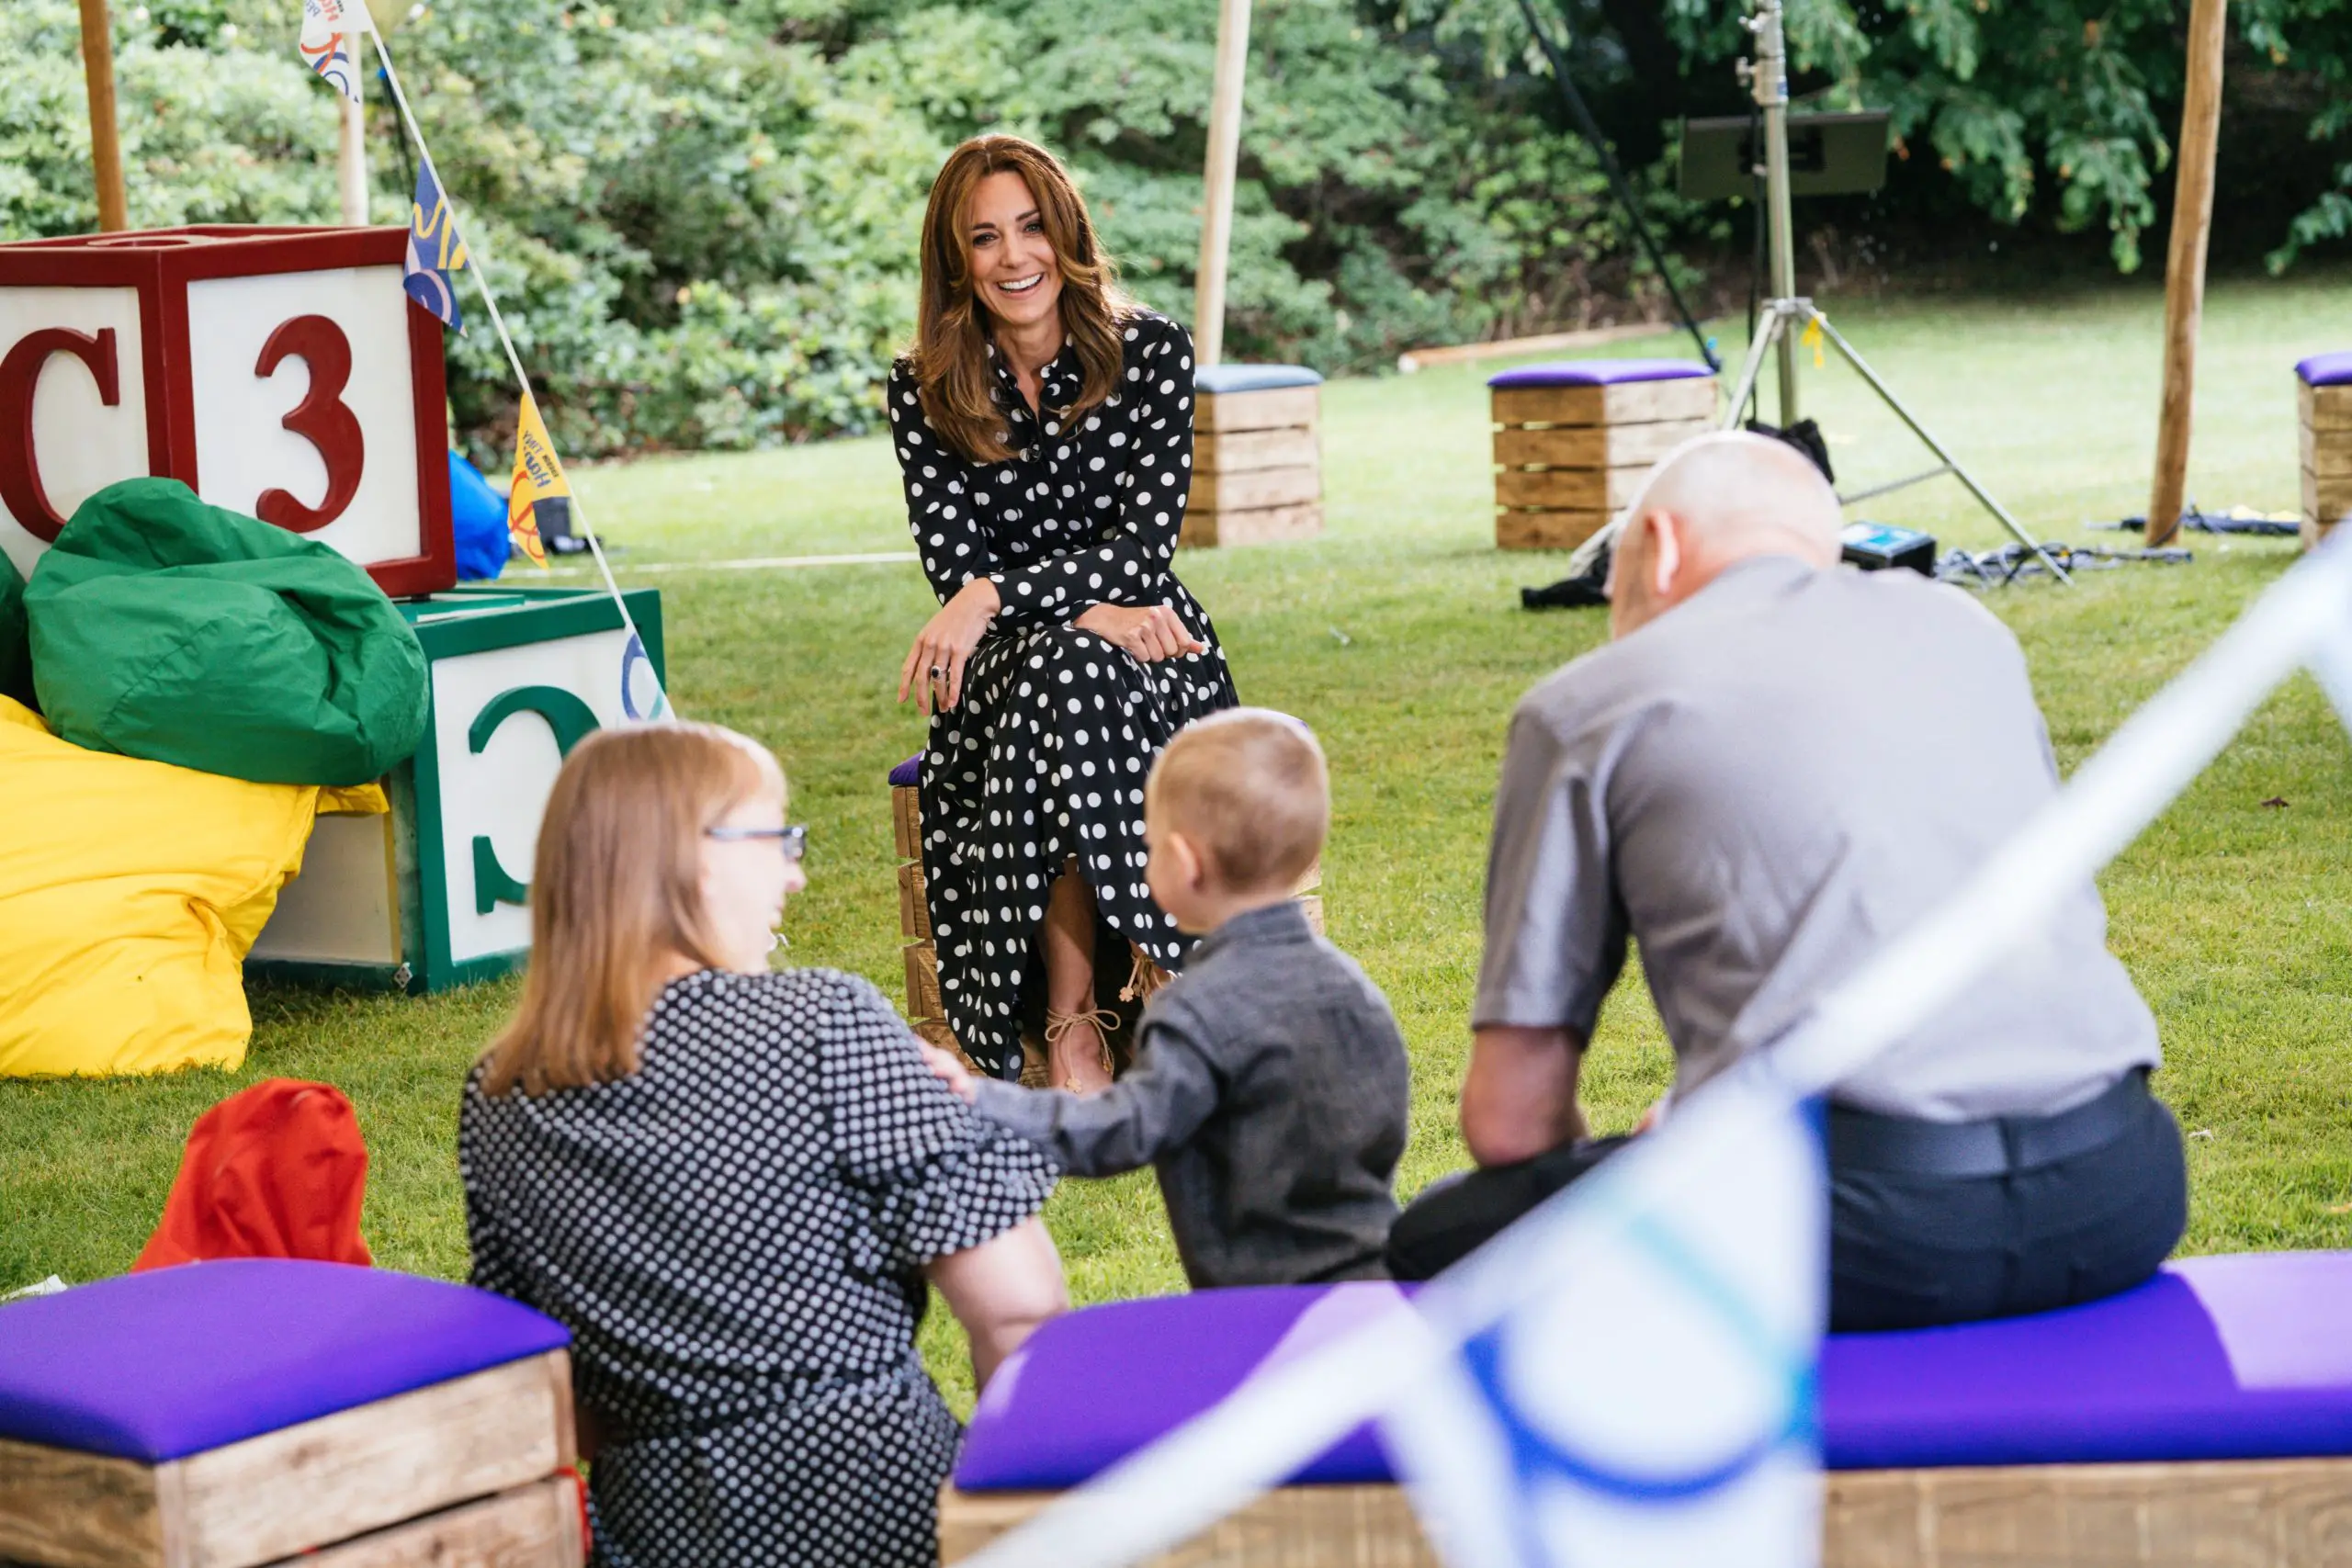 The duchess of Cambridge talked about her kids at Tiny Happy People